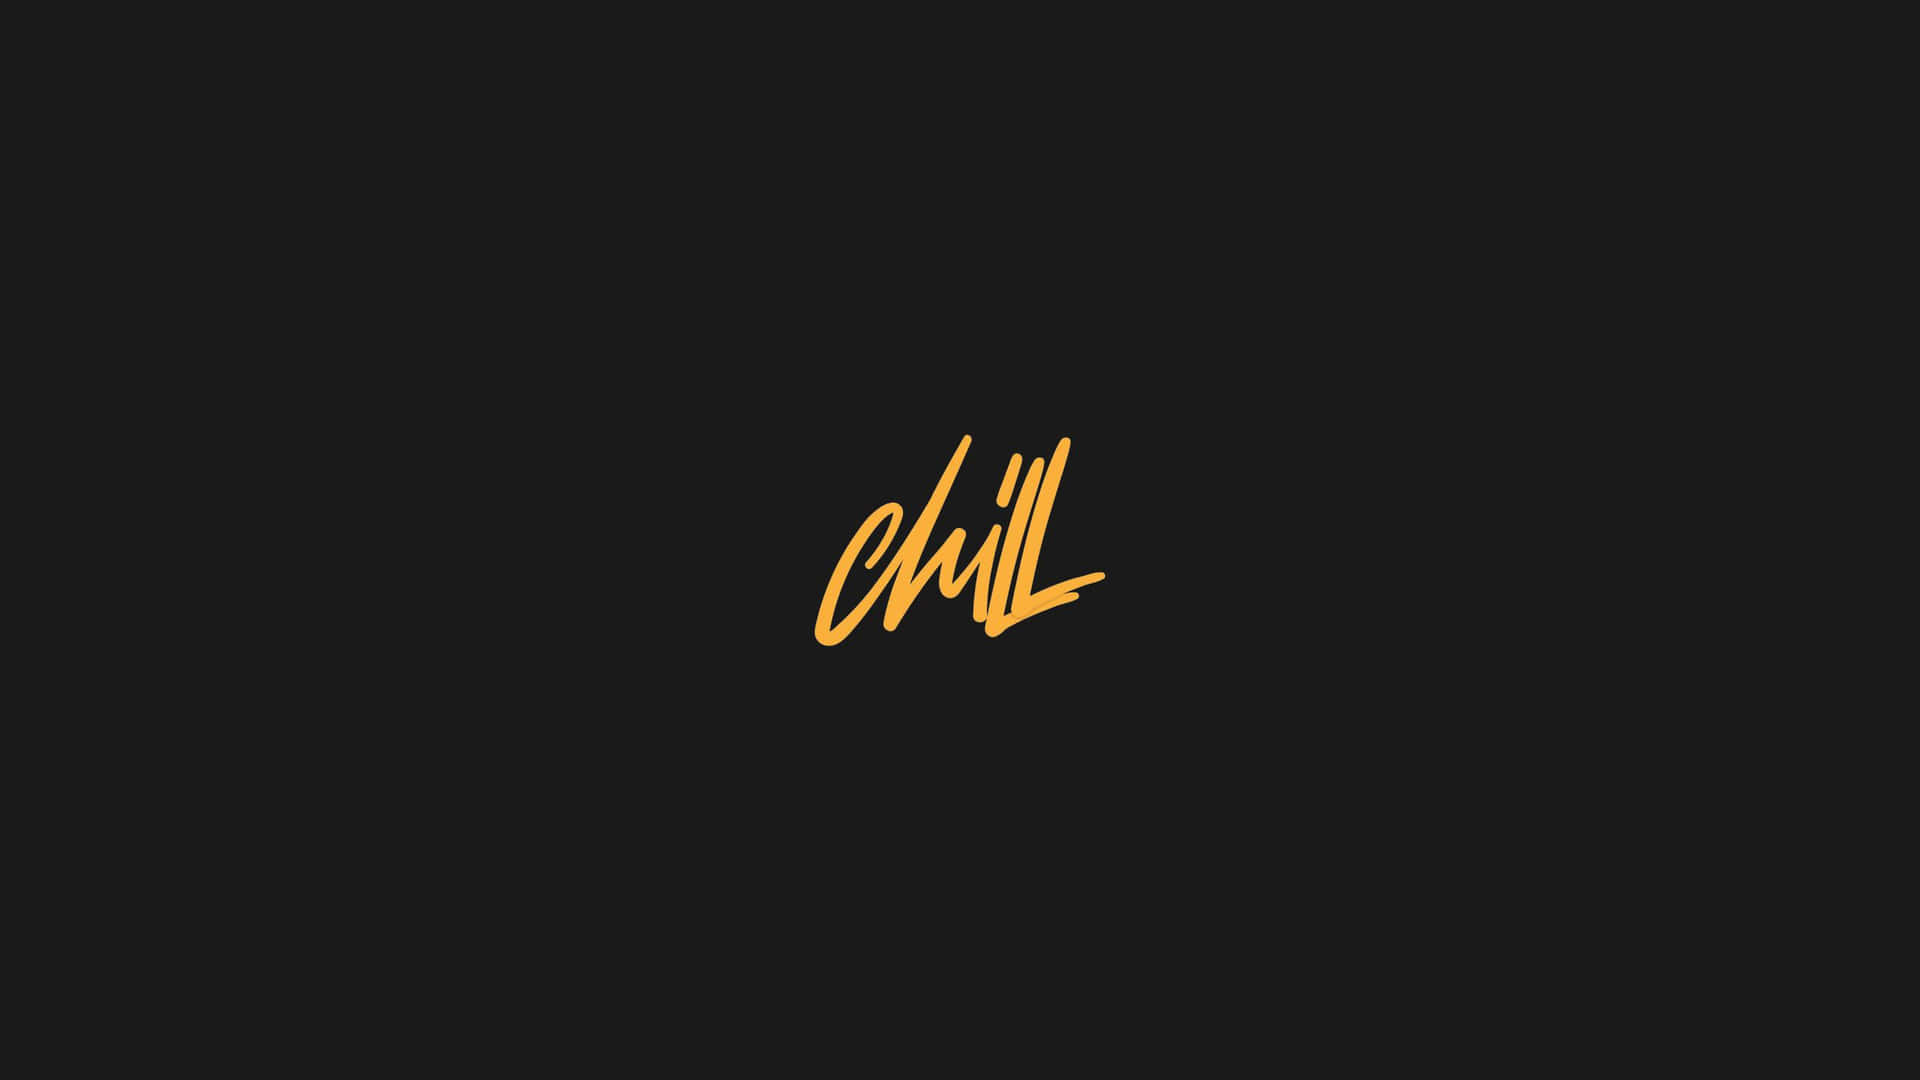 A Black Background With The Word Chill Written On It Wallpaper